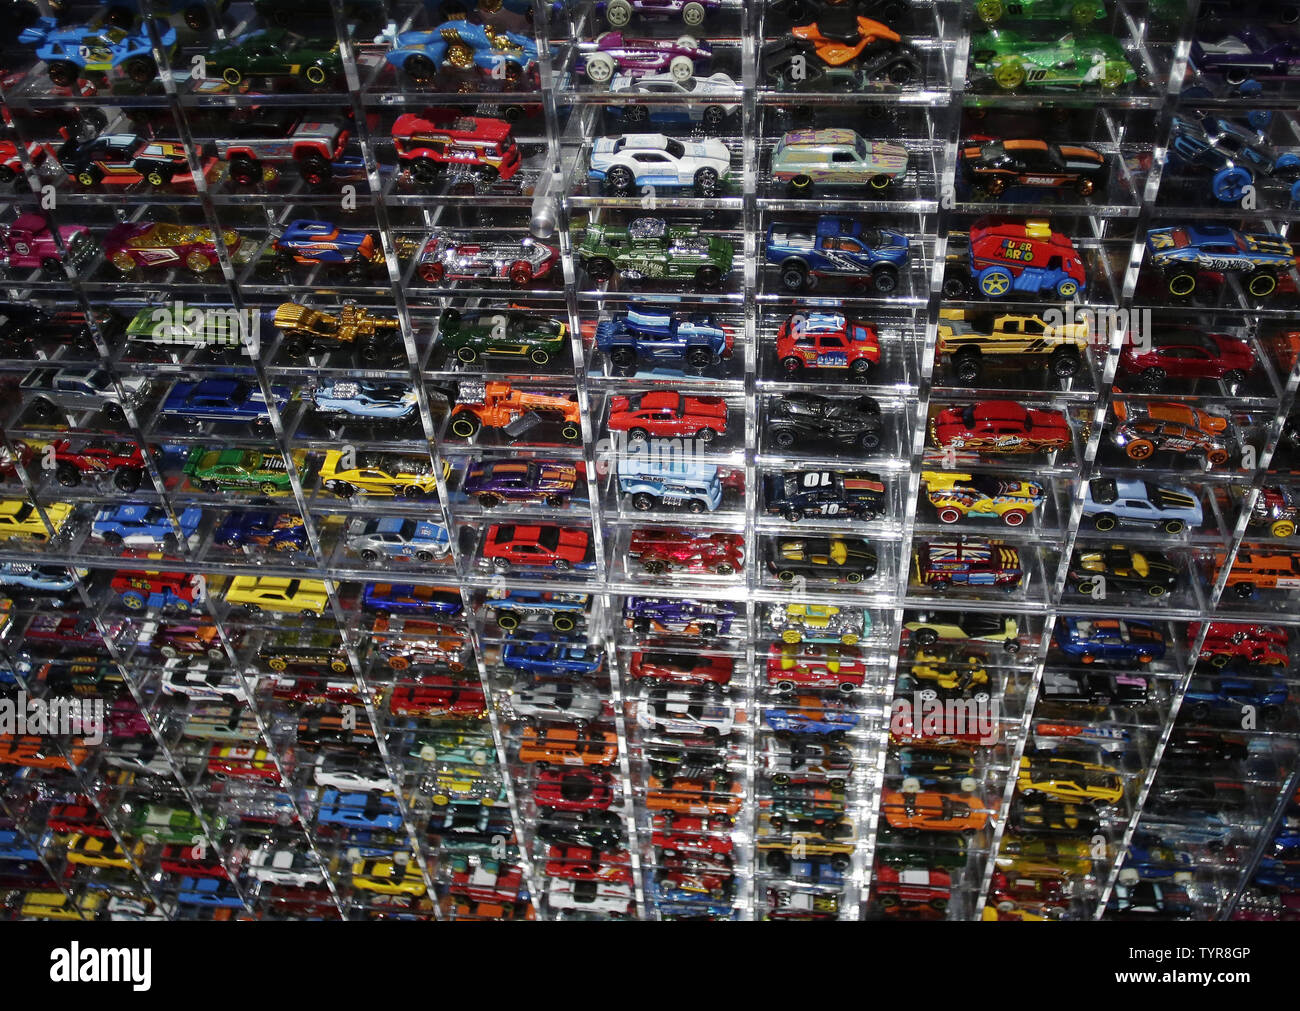 Hot Wheels cars by Mattel are on display at the 113th North American  International Toy Fair at the Jacob K. Javits Convention Center in New York  City on February 13, 2016. The